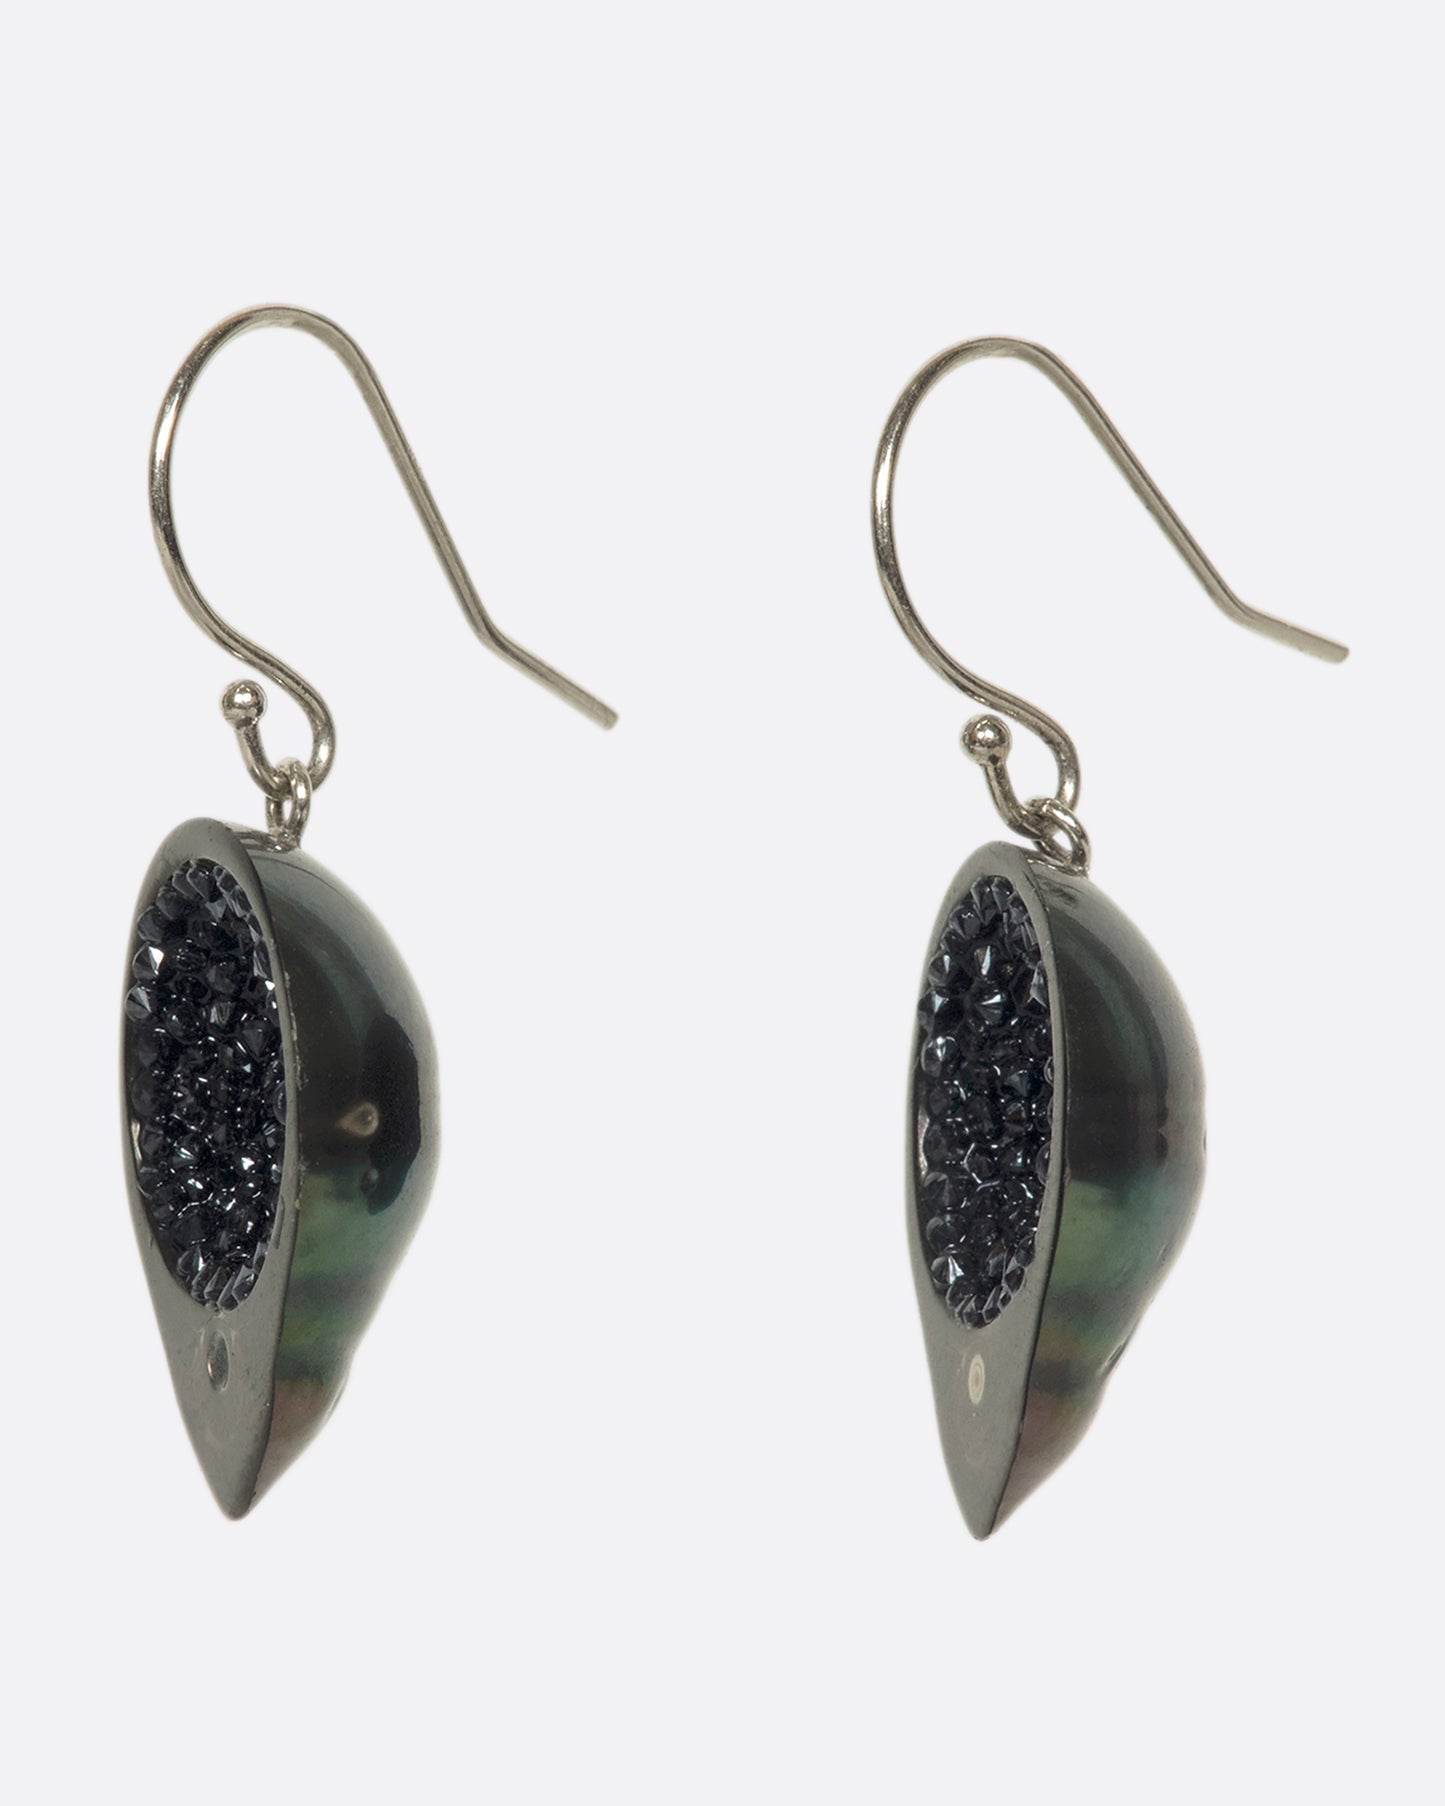 A stunning pair of Tahitian baroque pearls with 14k white gold hooks. The black pearl with green and purple iridescence are lined with reclaimed black diamonds and full of wicked sparkle.